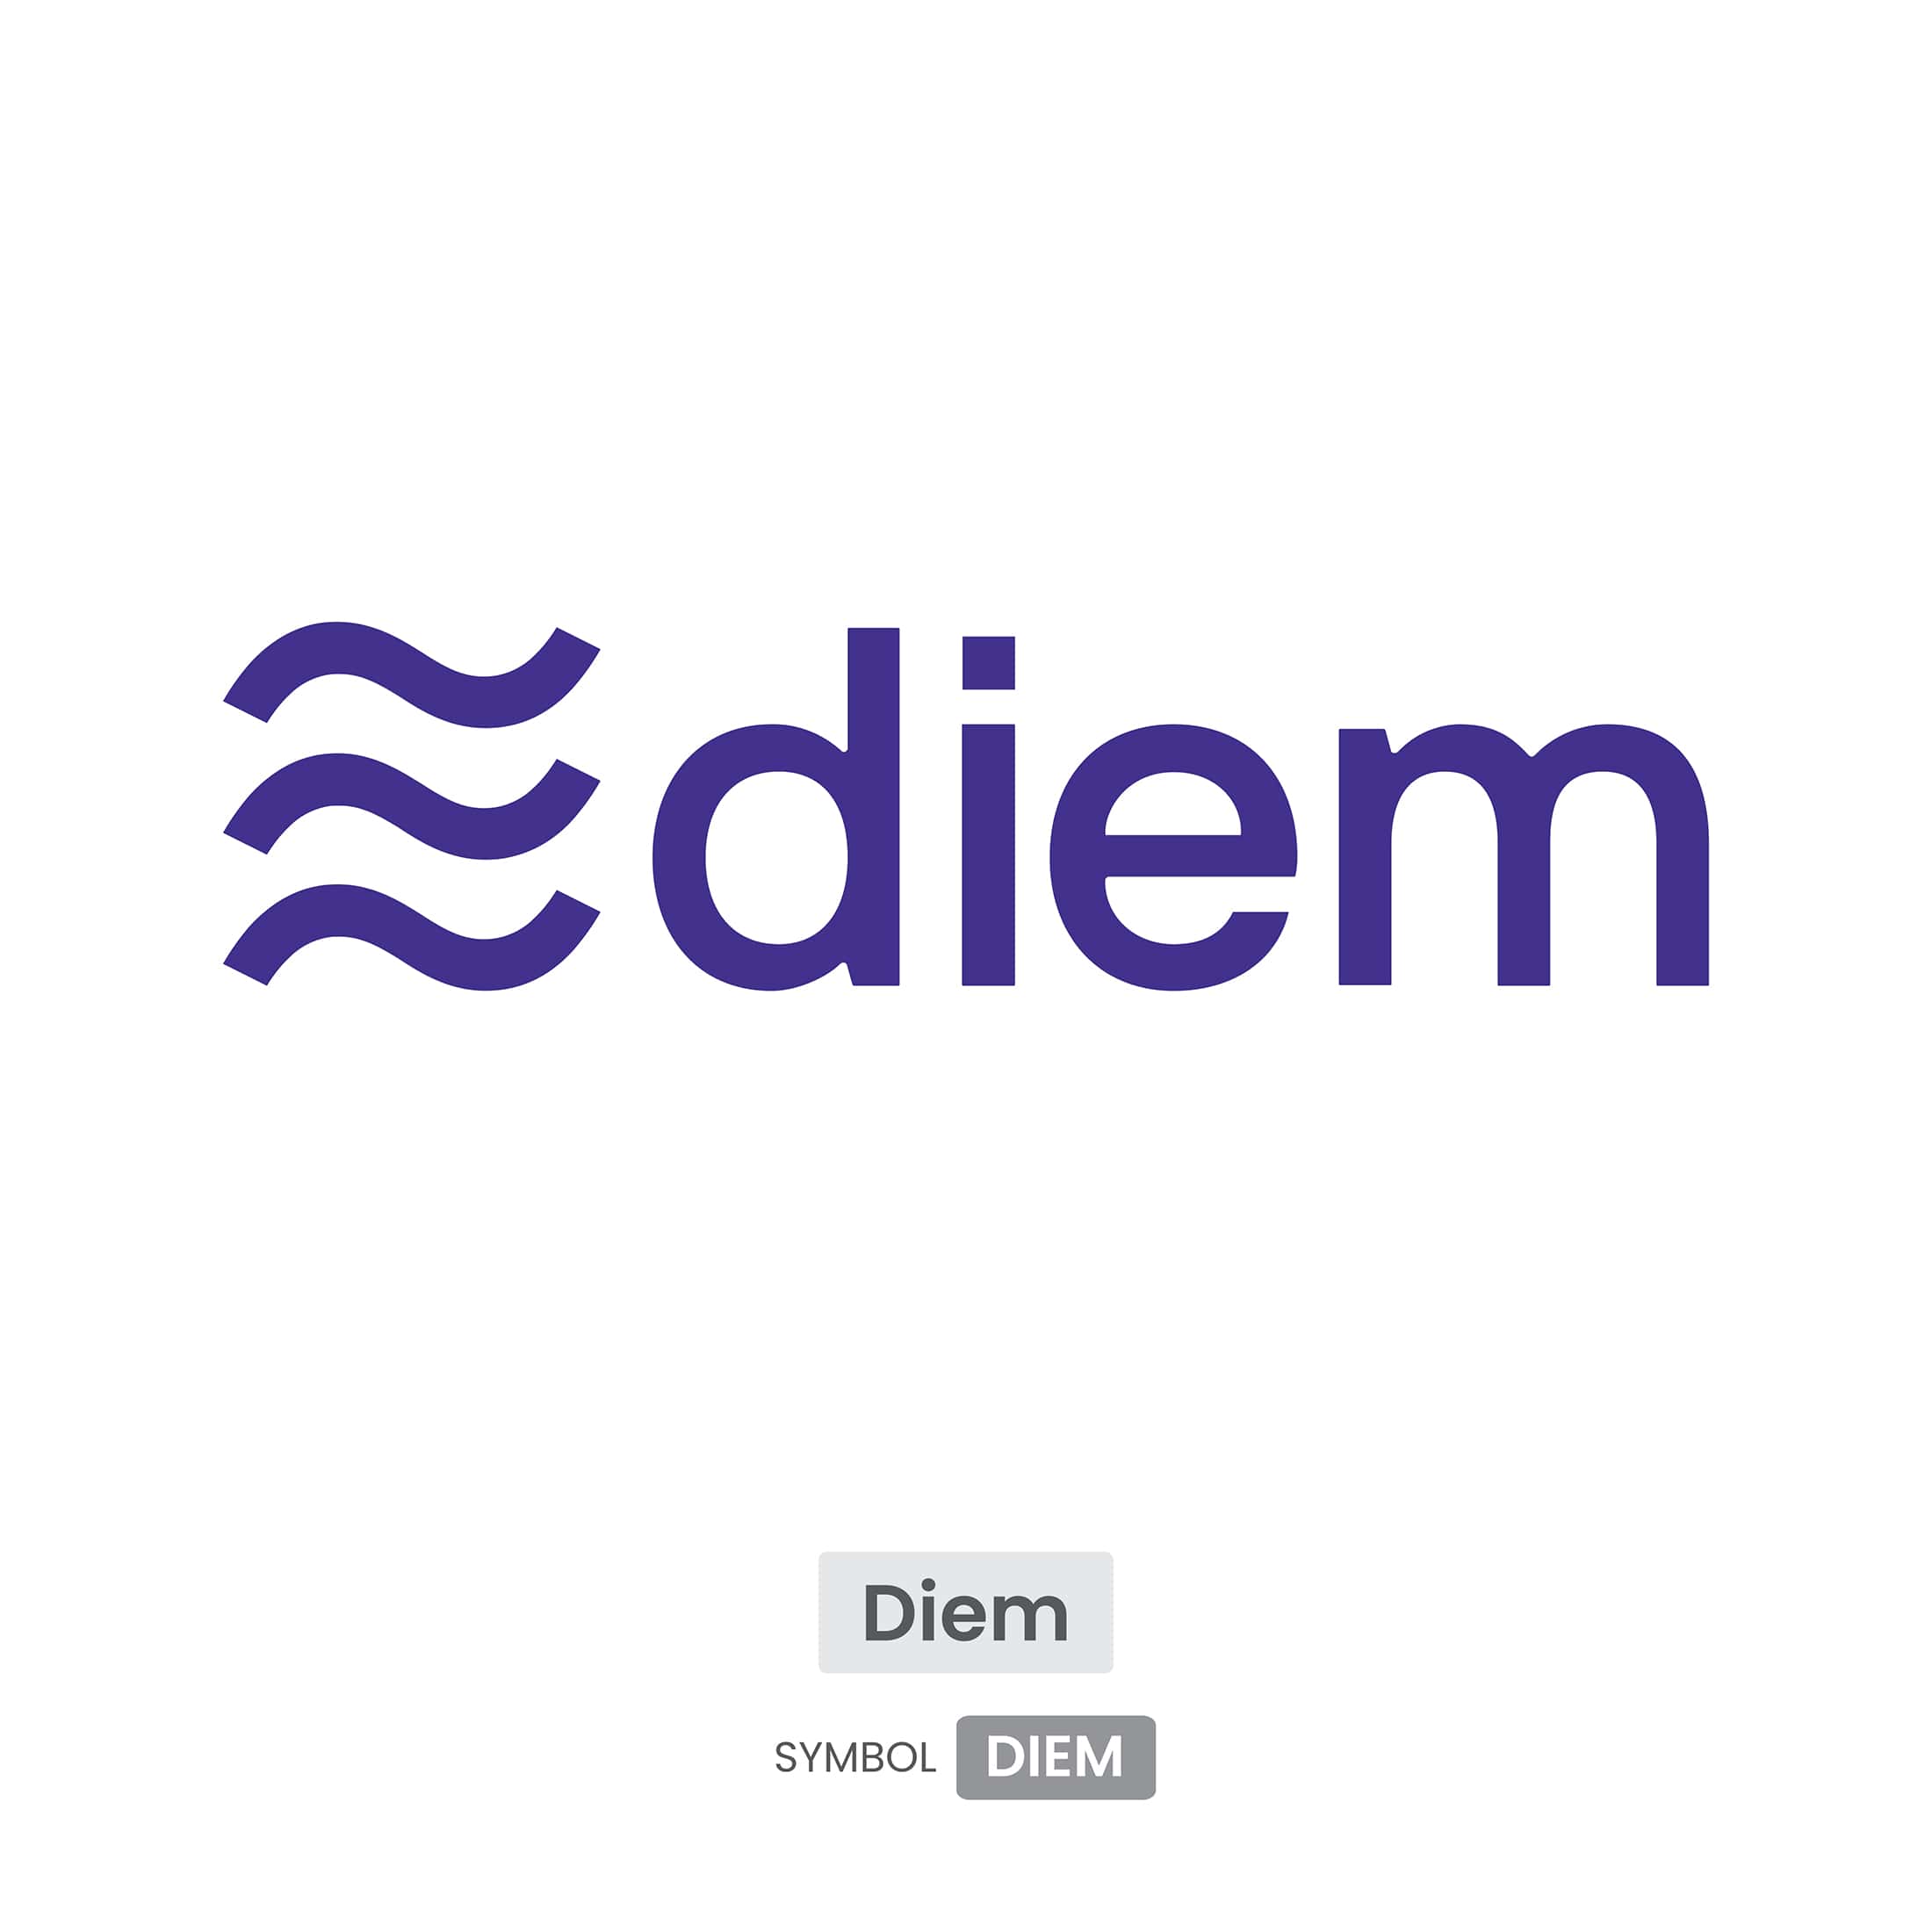 Diem (DIEM) crypto currency logo AI and SVG vector free download